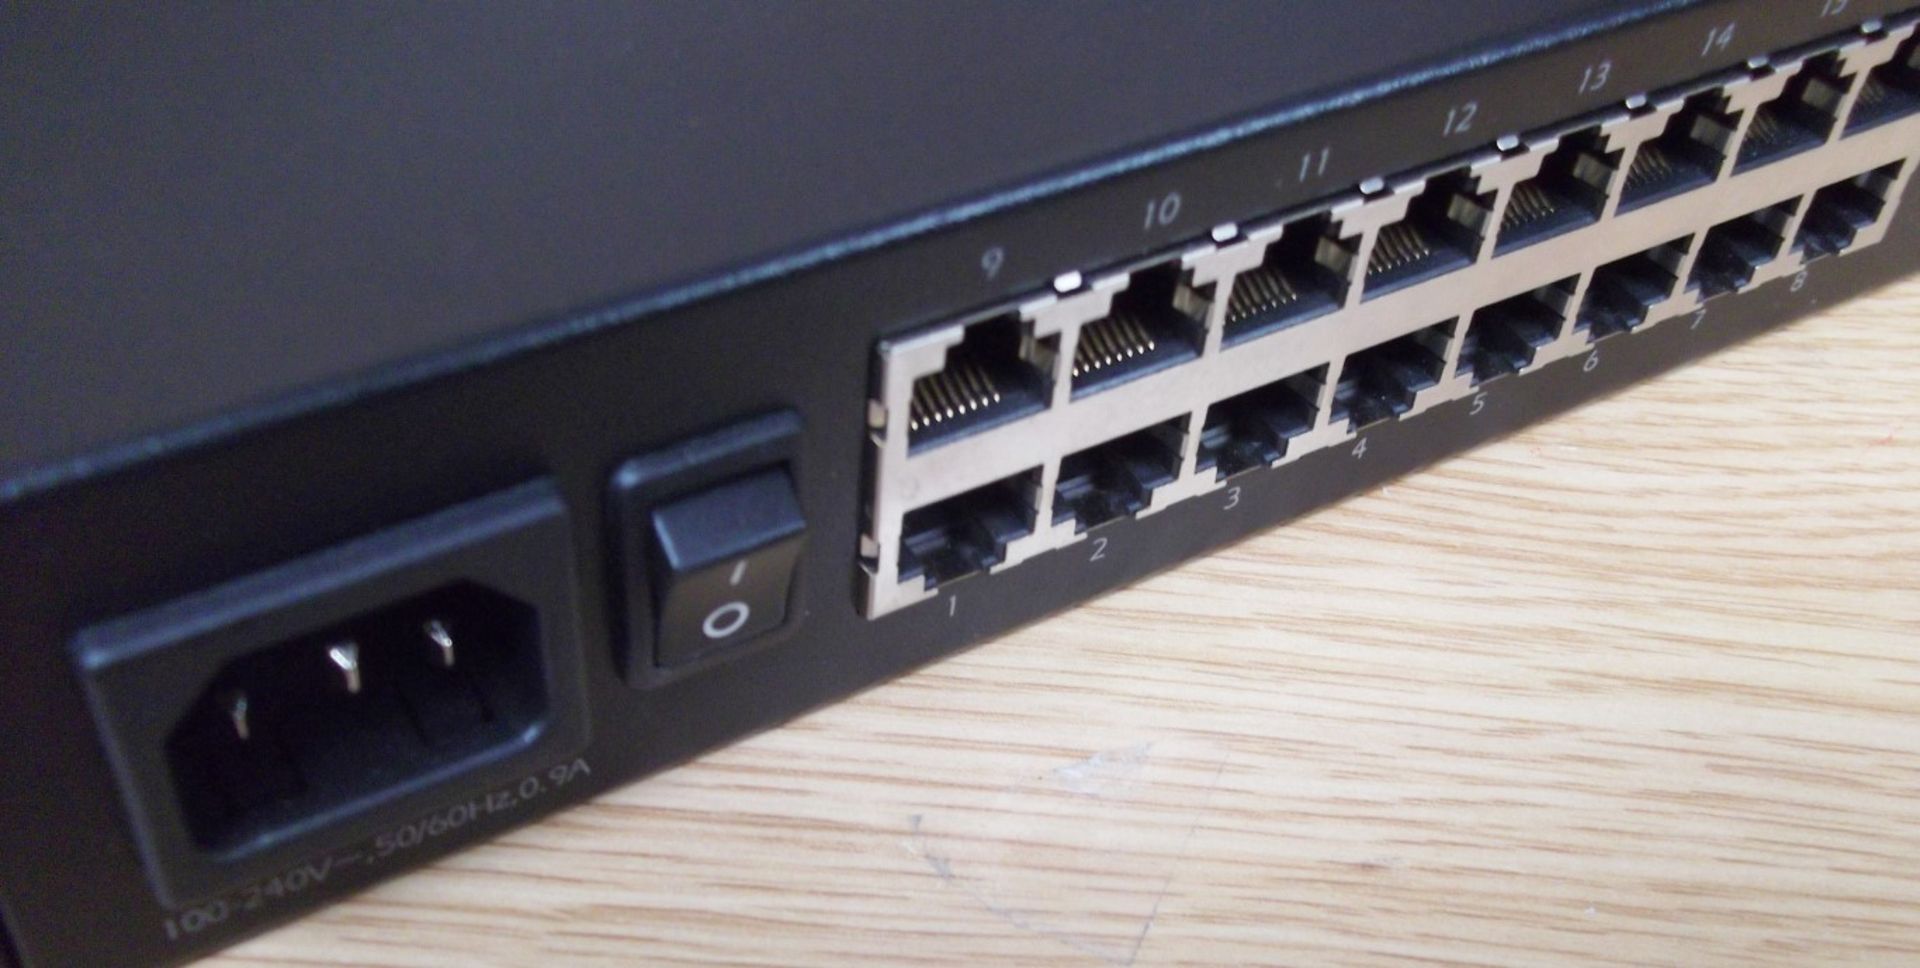 1 x APC 16-Port IP KVM - Recently Taken From A Working Office Environment - Ref NSB009 - CL106 - - Image 5 of 6